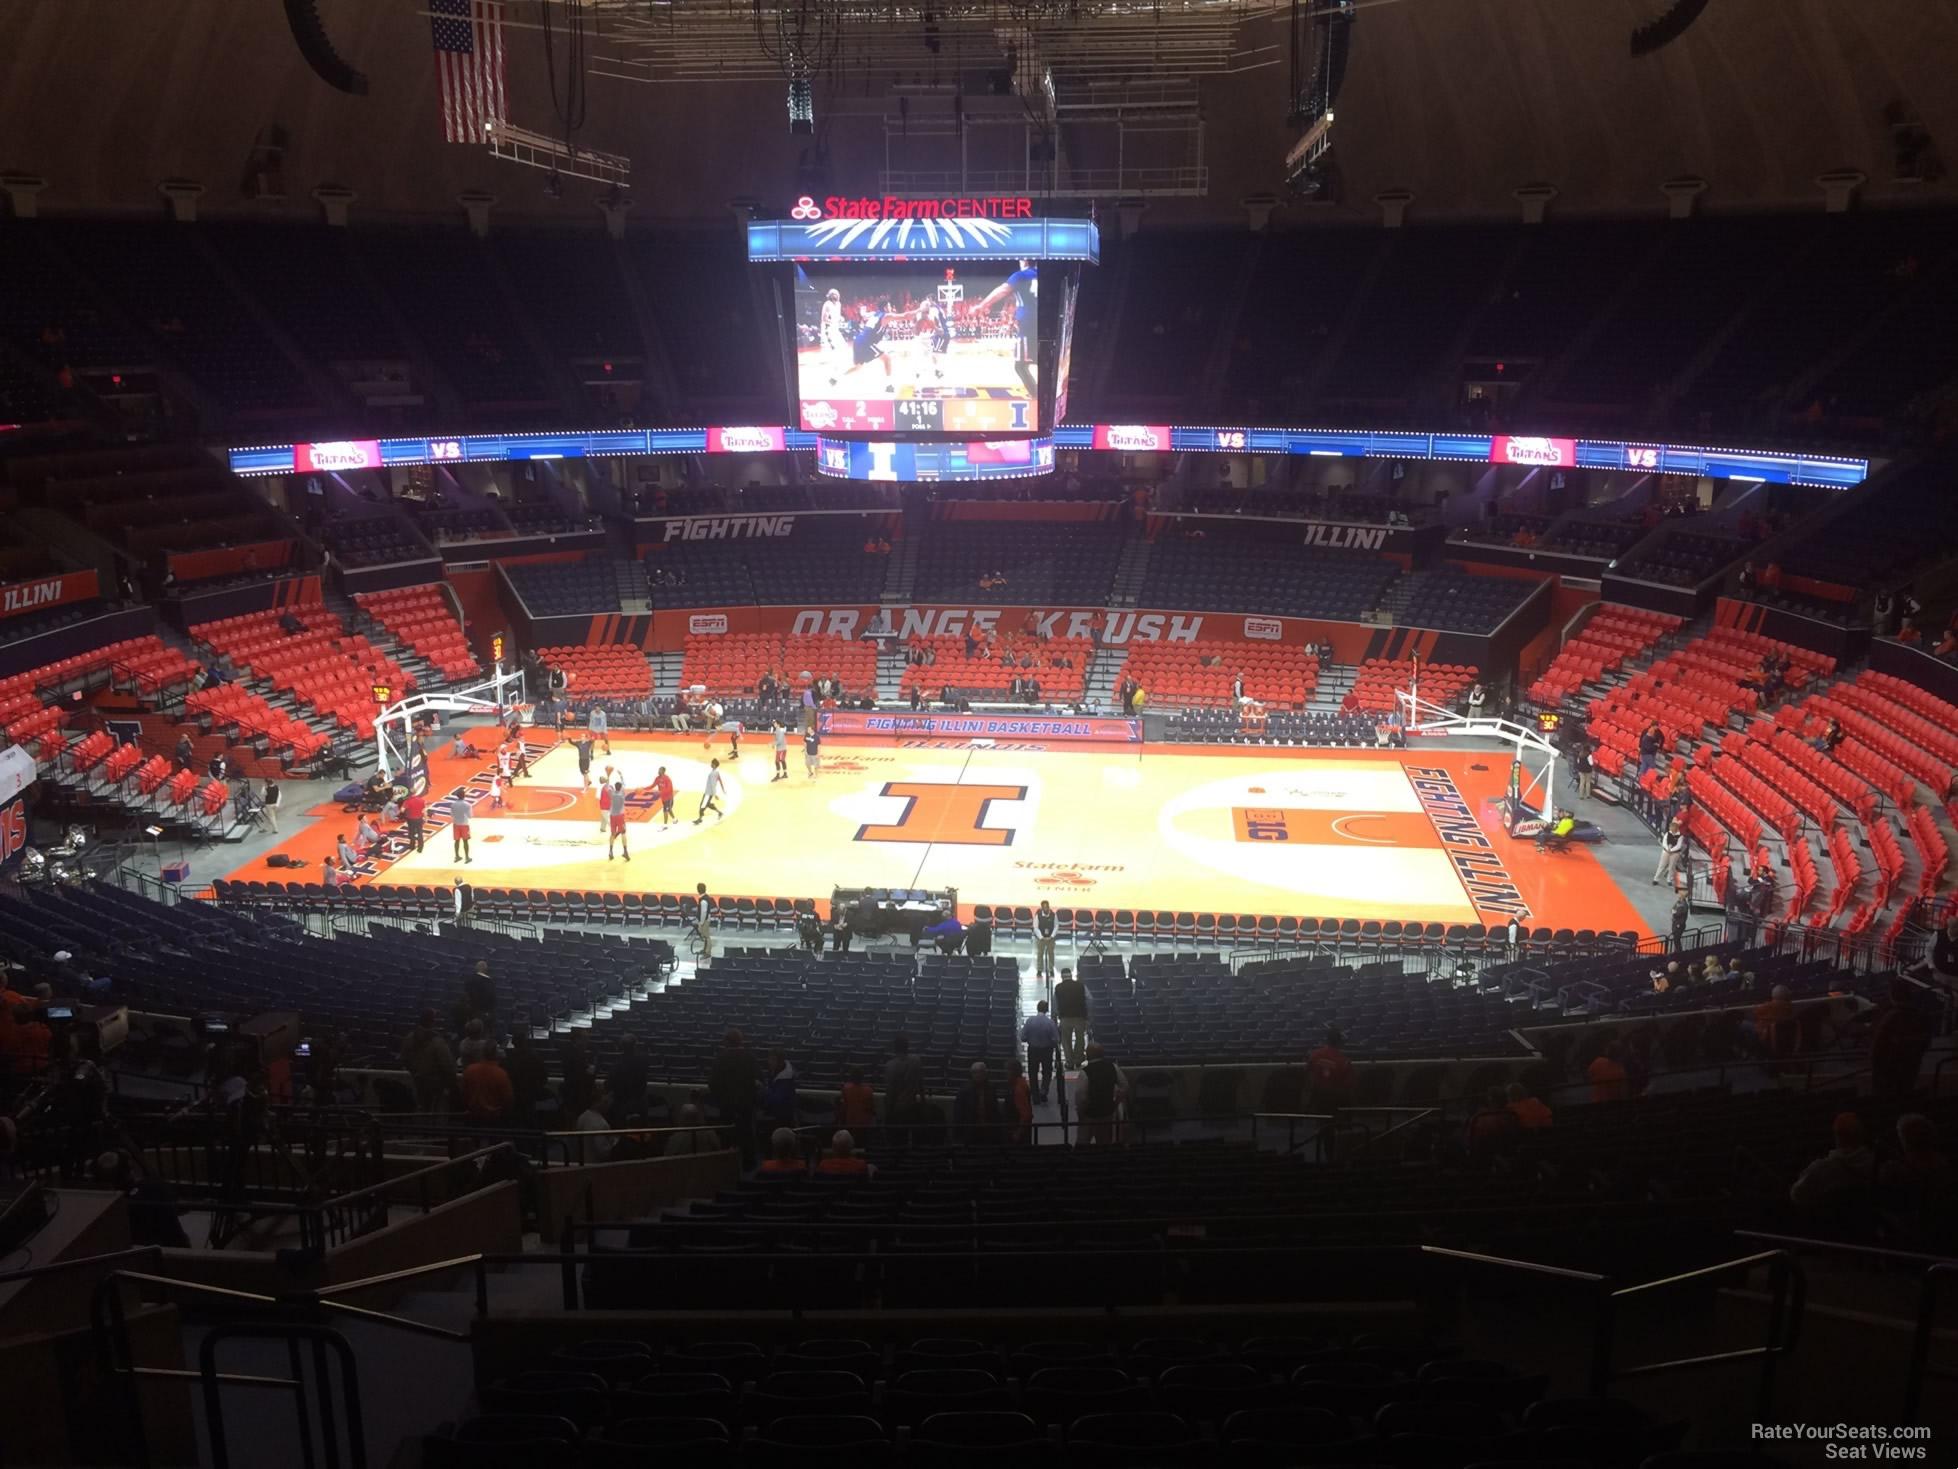 section 248, row 10 seat view  - state farm center